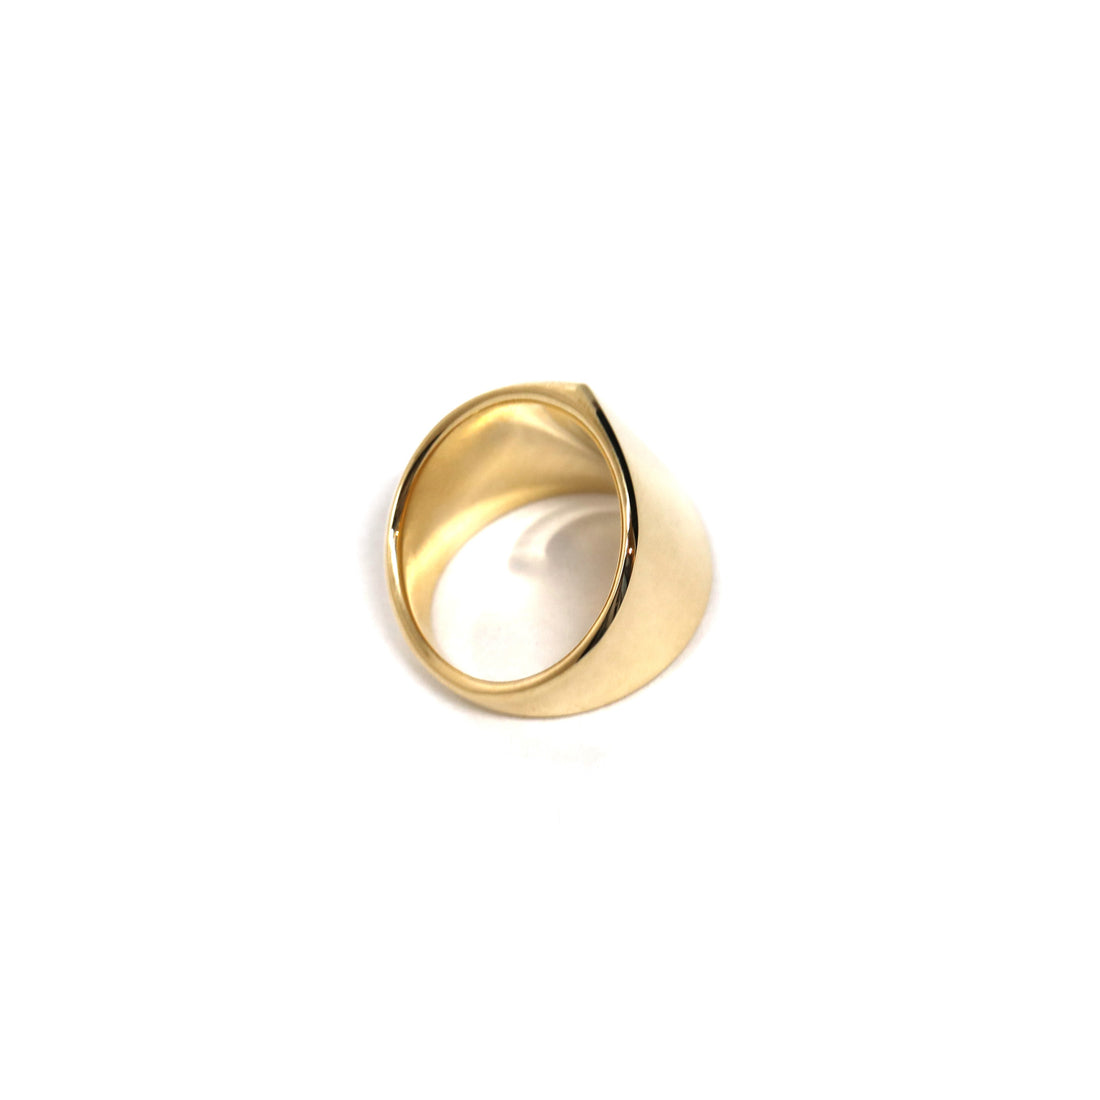 Back view of edgy yellow gold ring bena jewelry designer made in montreal canada fine jewelry gold bold jewelry minimalist fashion design montreal handmade in canada fine jewelry